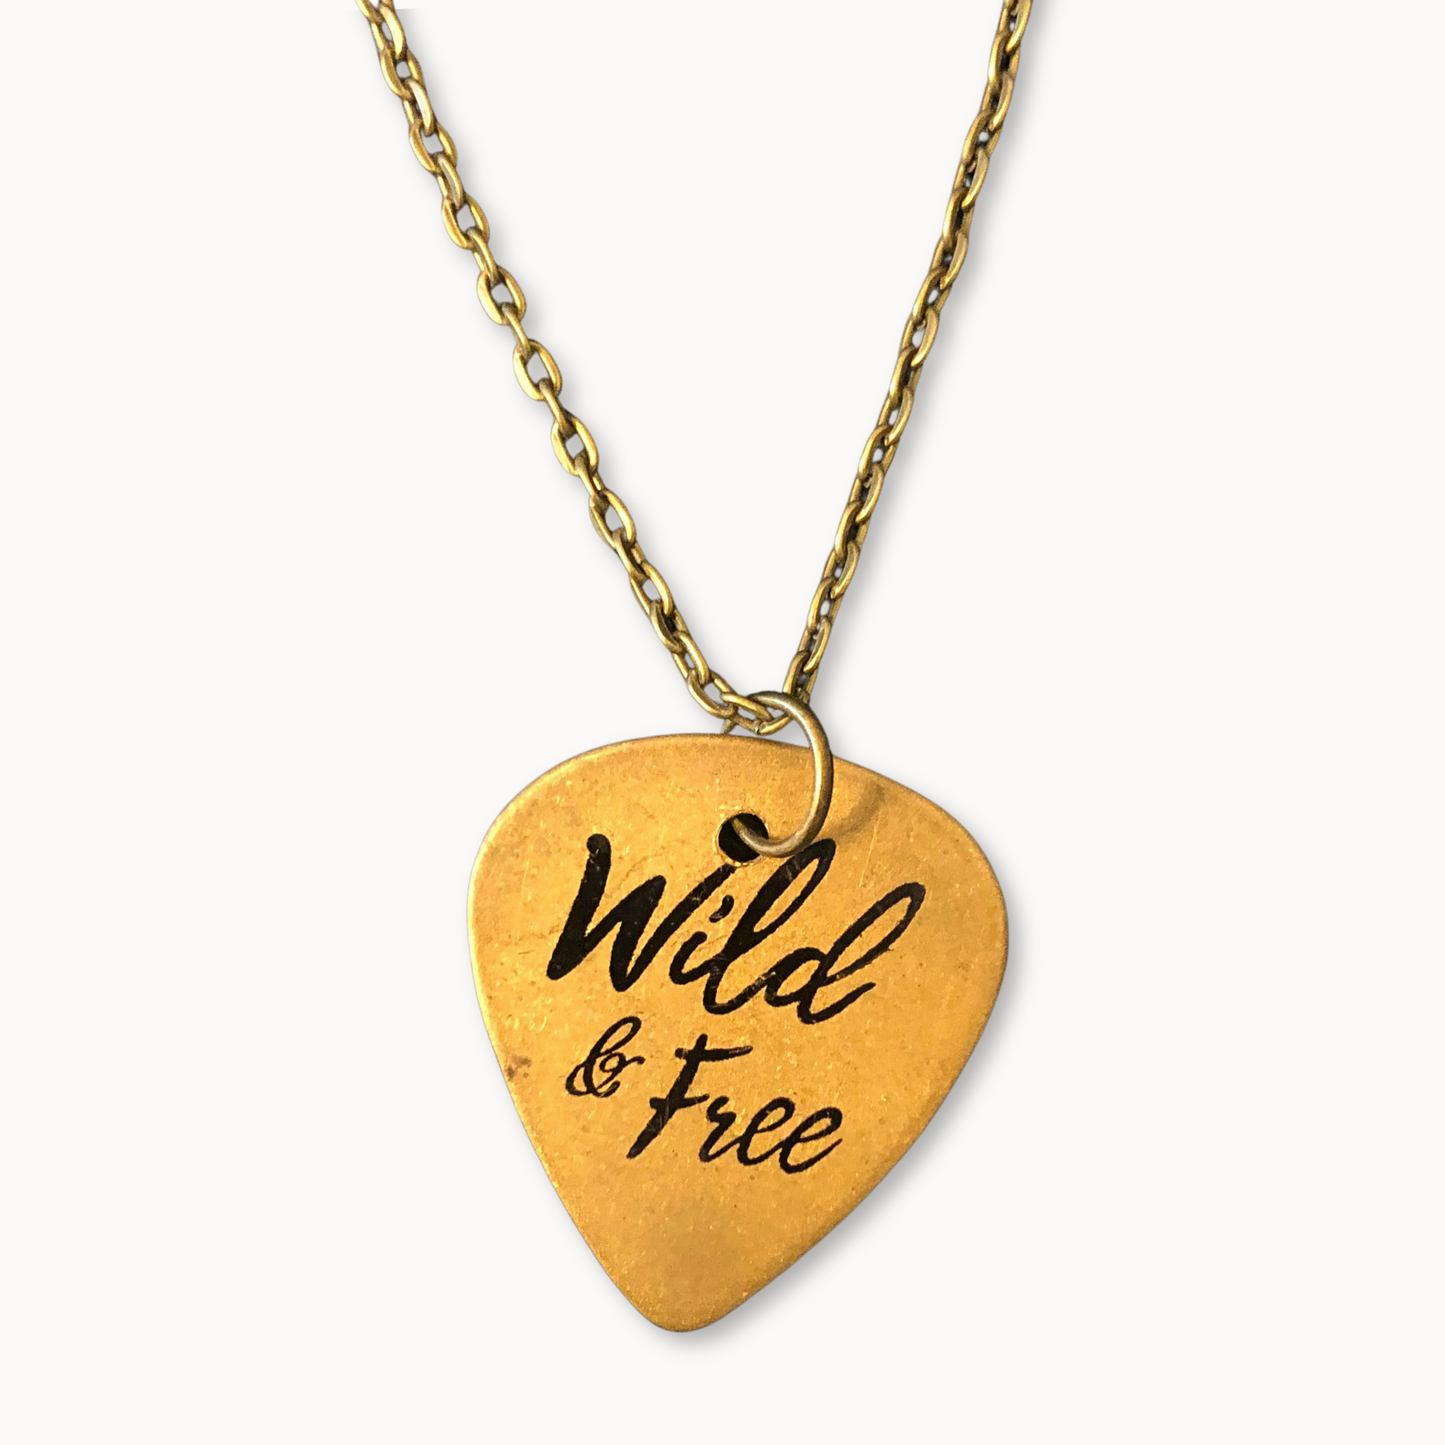 Guitar Pick Necklace with Metal Chain: Wild & Free